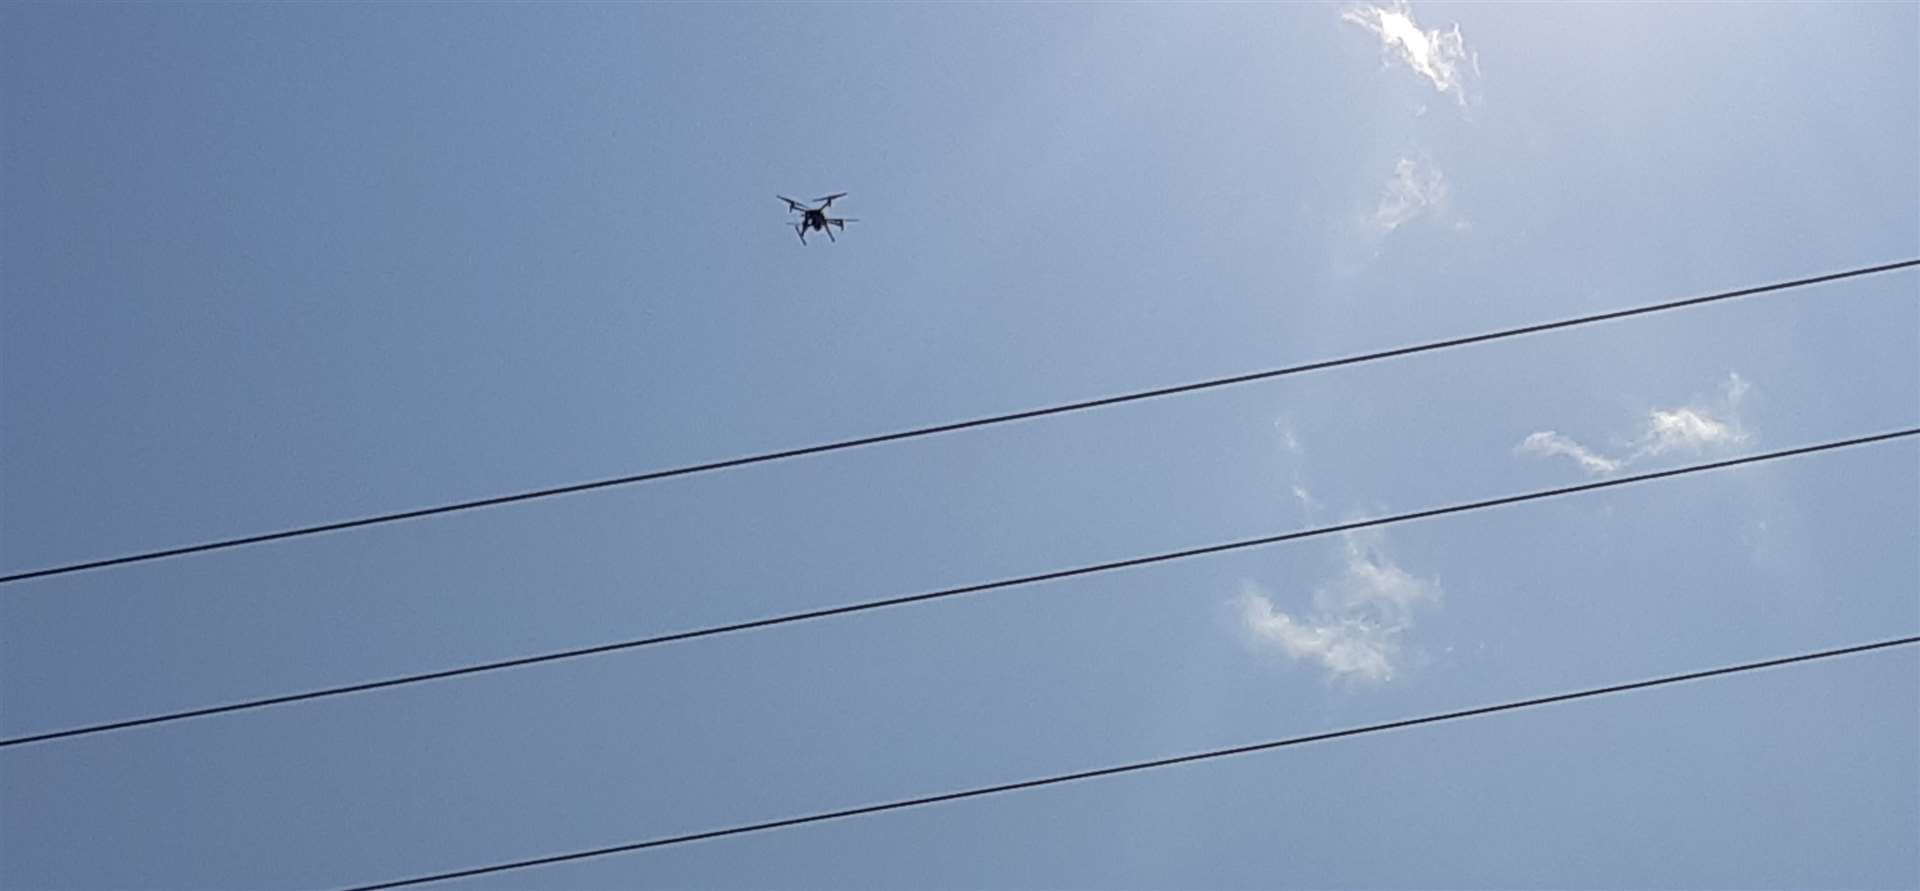 A drone has been spotted hovering above the river